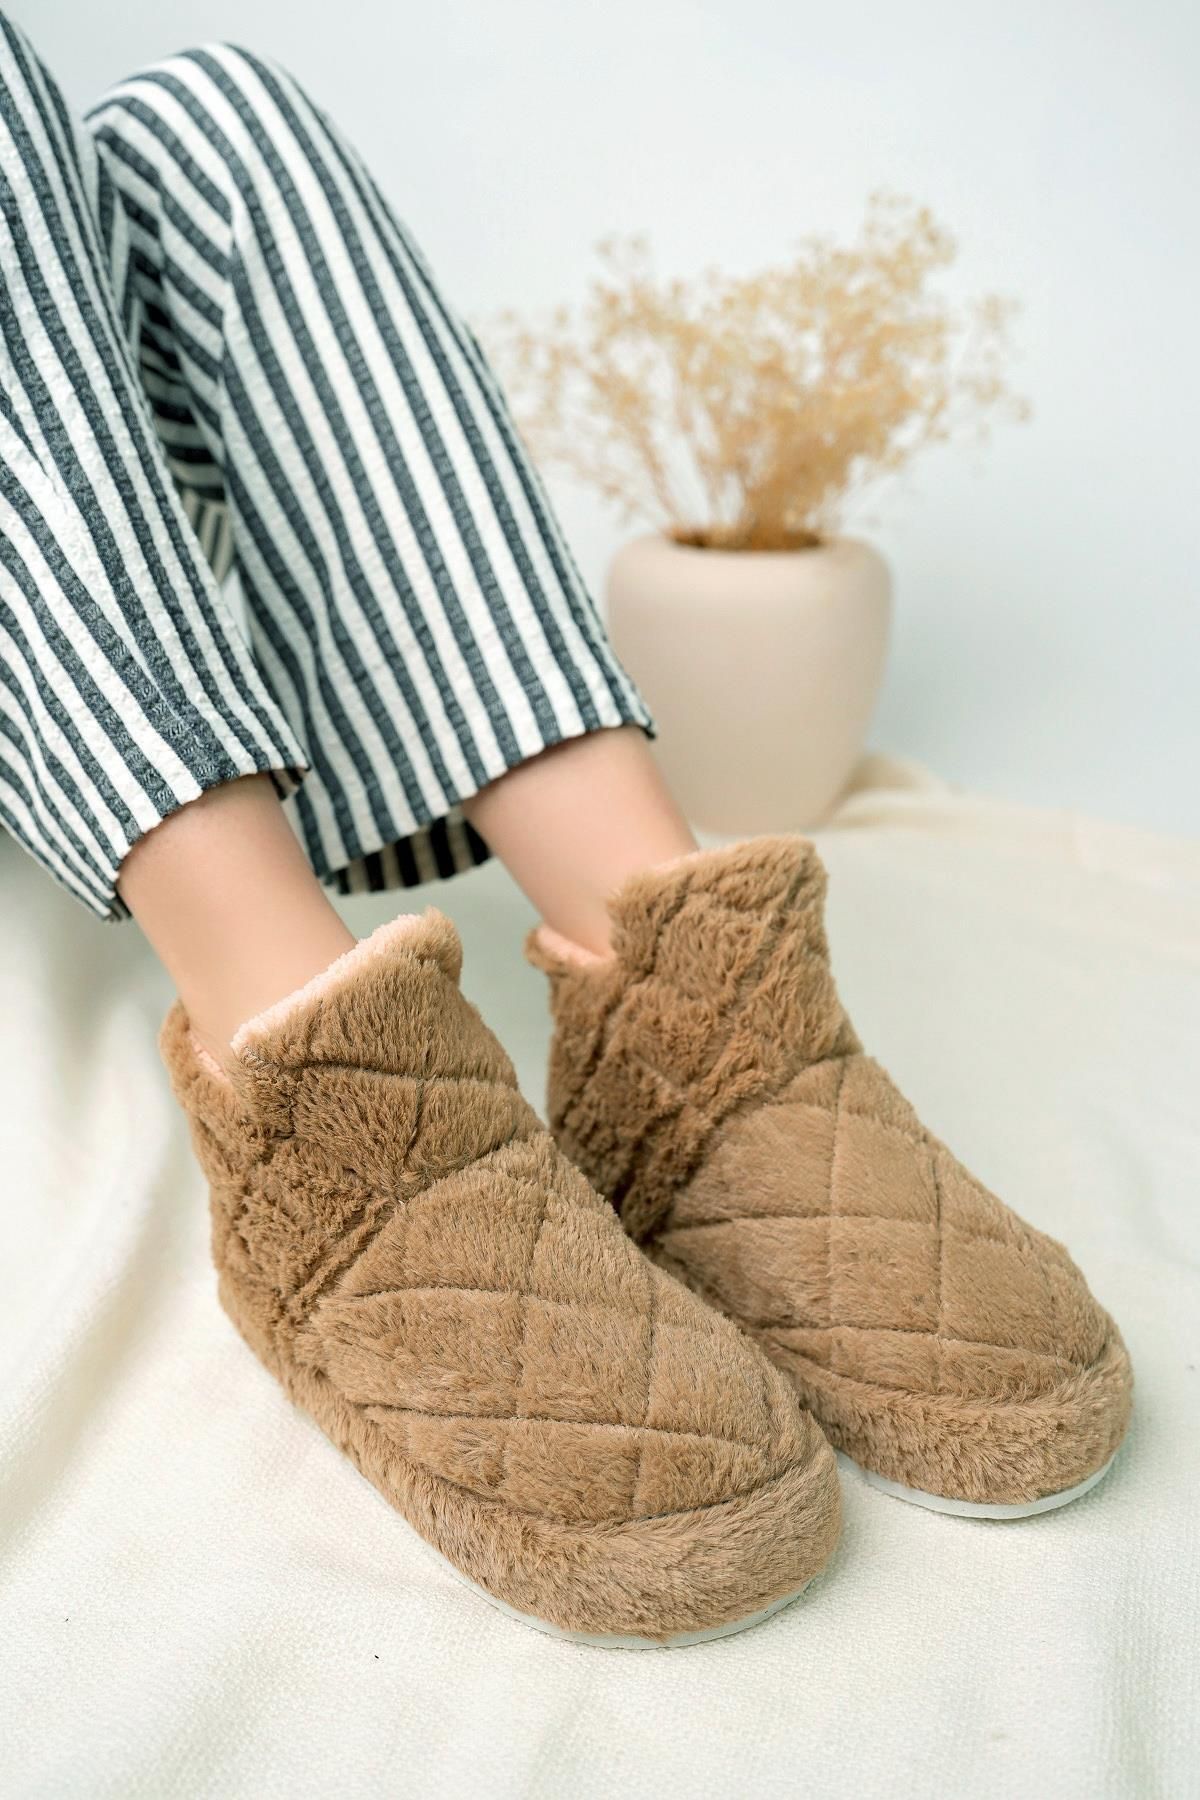 Buy Couple Slippers Online In India - Etsy India